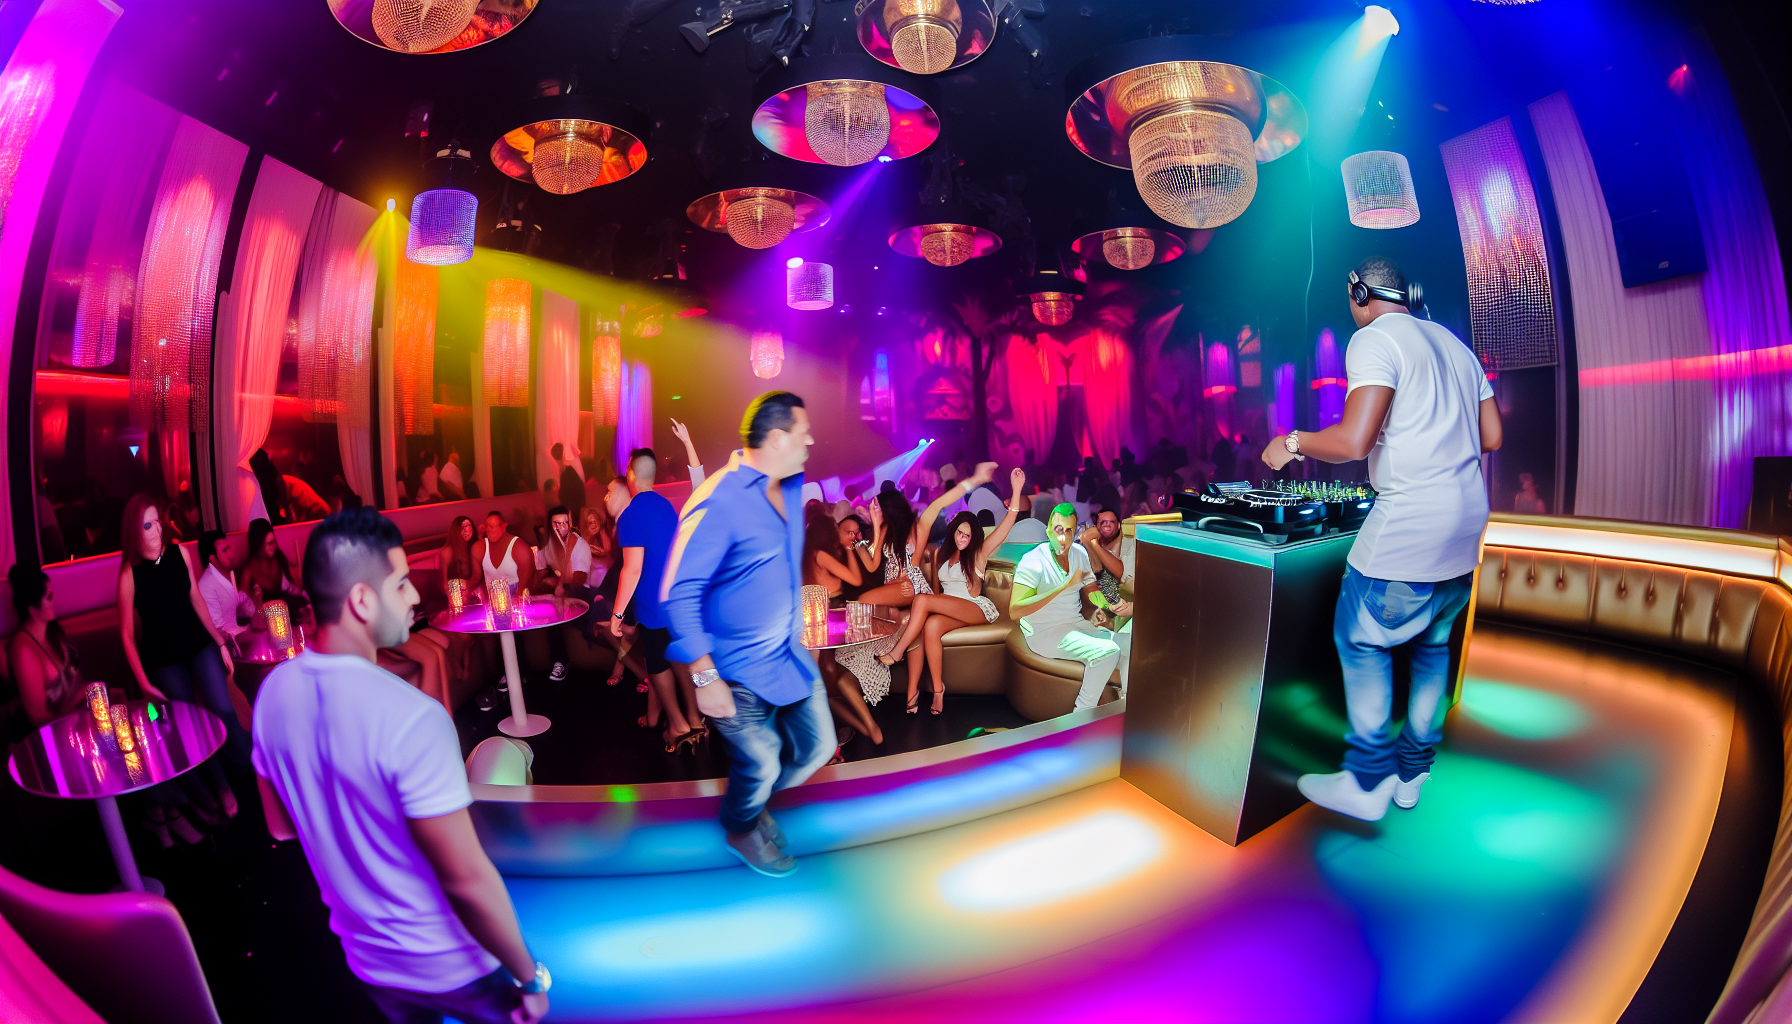 A luxurious VIP club with colorful lights and people dancing